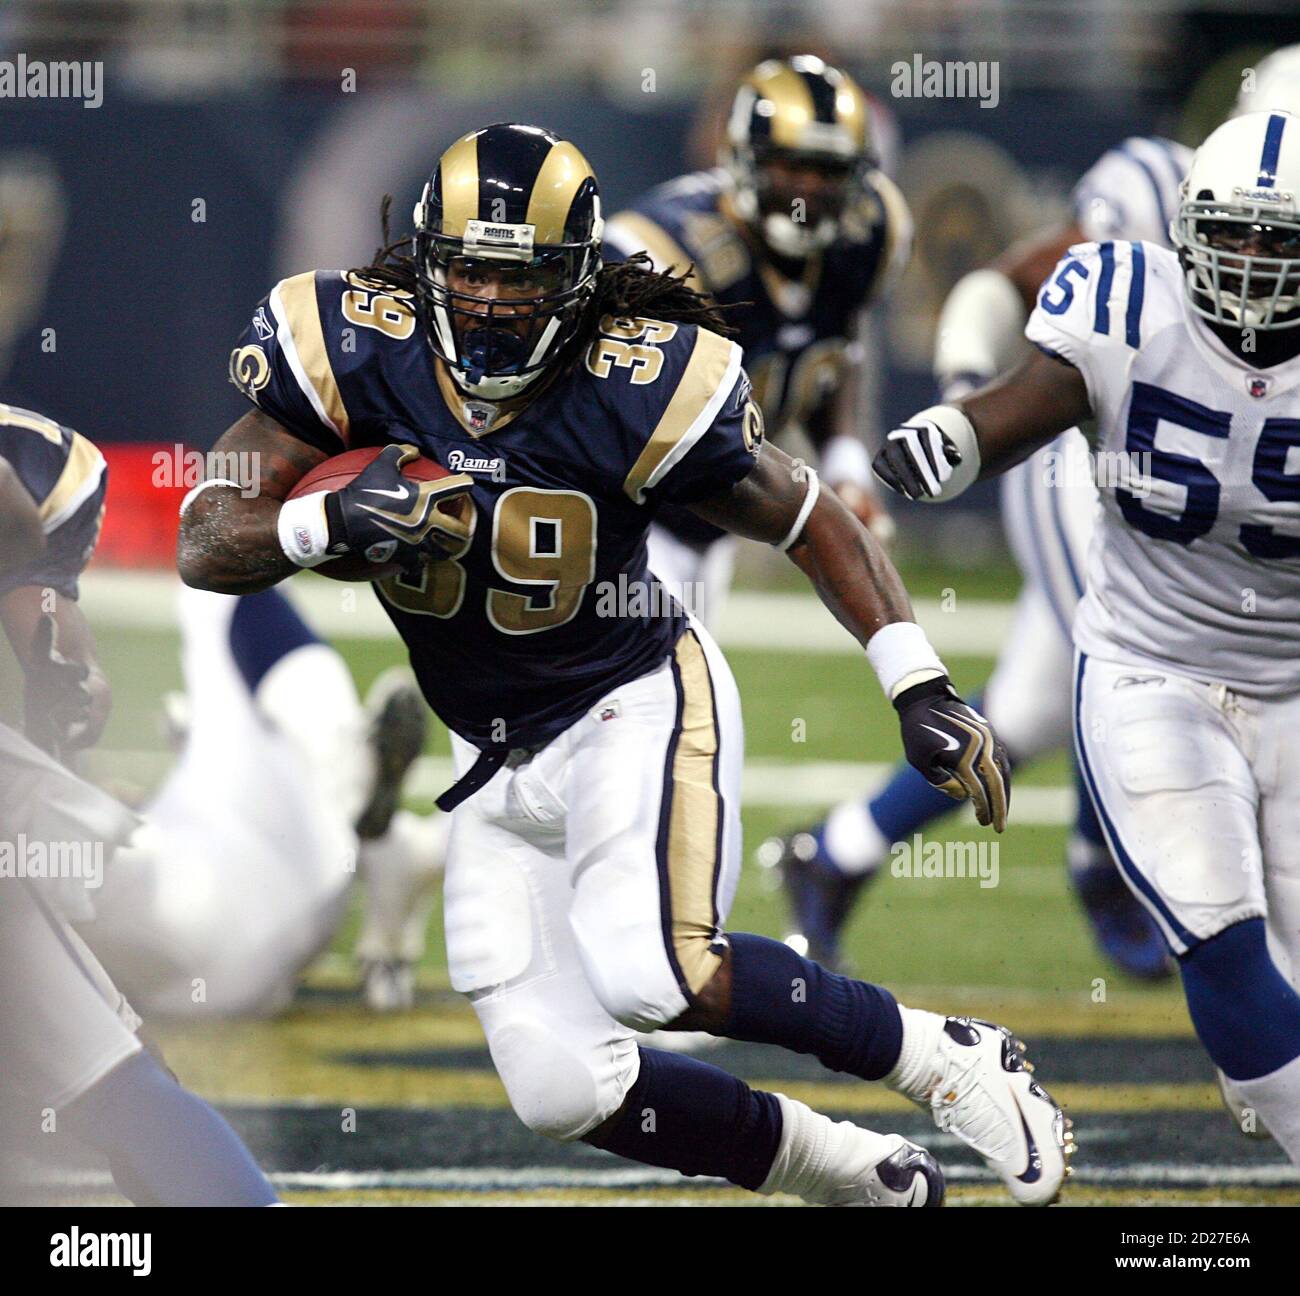 St. Louis Rams running back Steven Jackson (39) runs against the  Indianapolis Colts in the third quarter of their NFL football game in St.  Louis, Missouri October 25, 2009. REUTERS/Peter Newcomb (UNITED